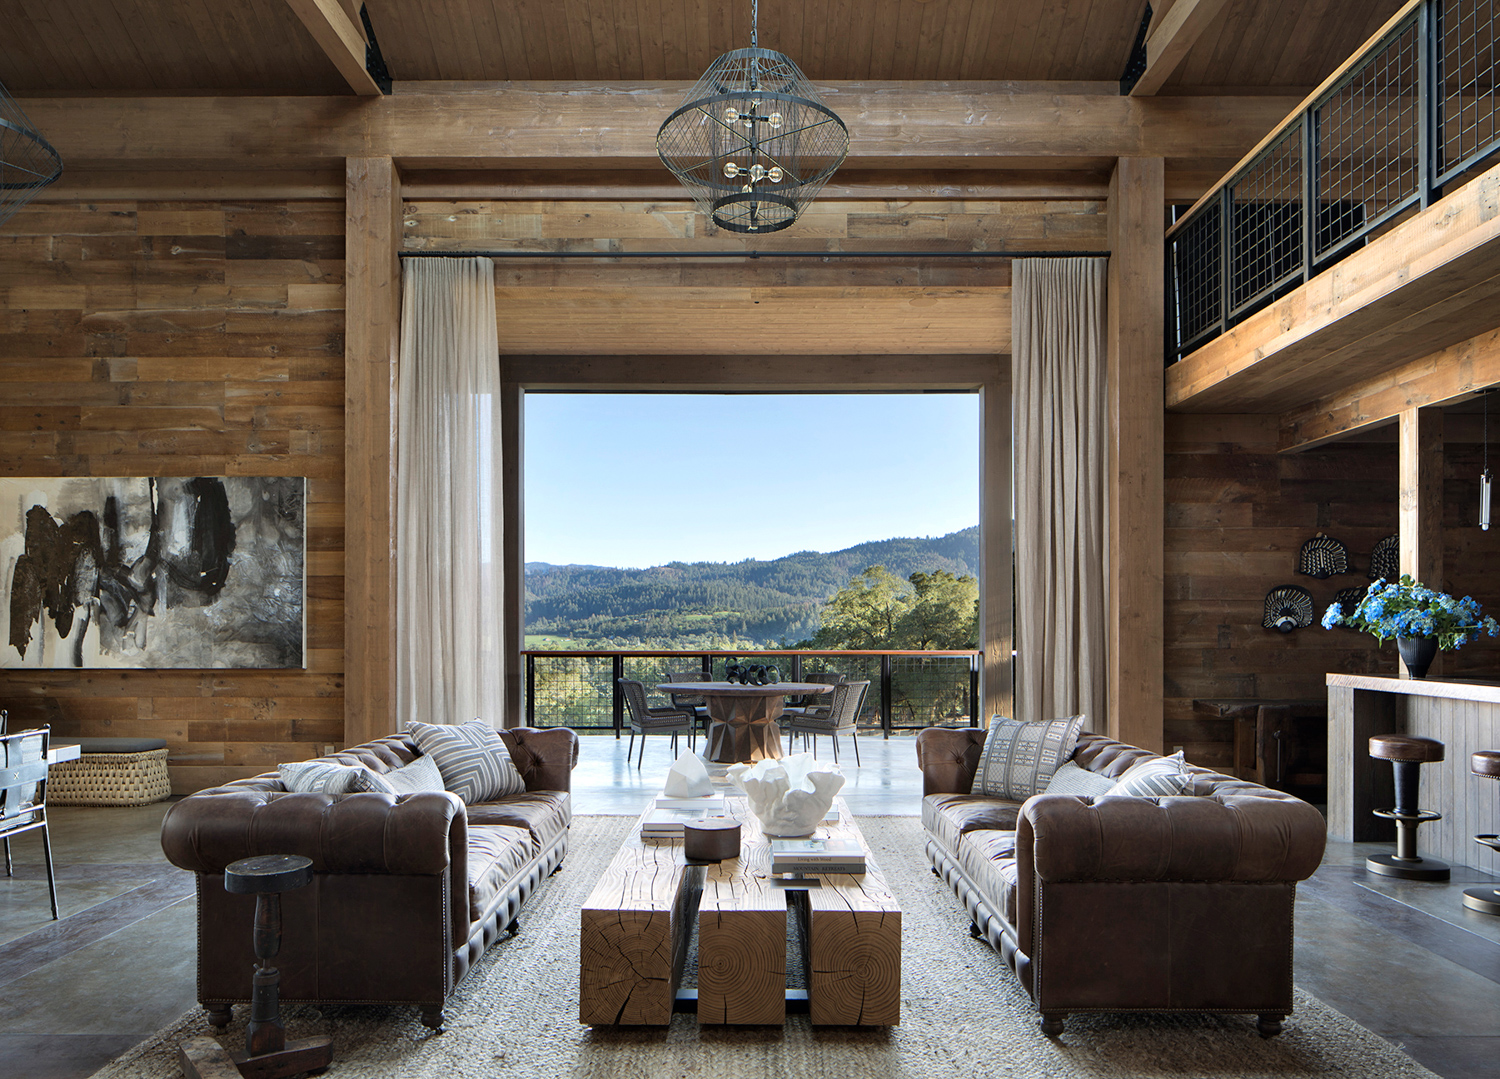 A wooden living room with leather sofas oepns up to an expansive outdoor patio. RED Winner.